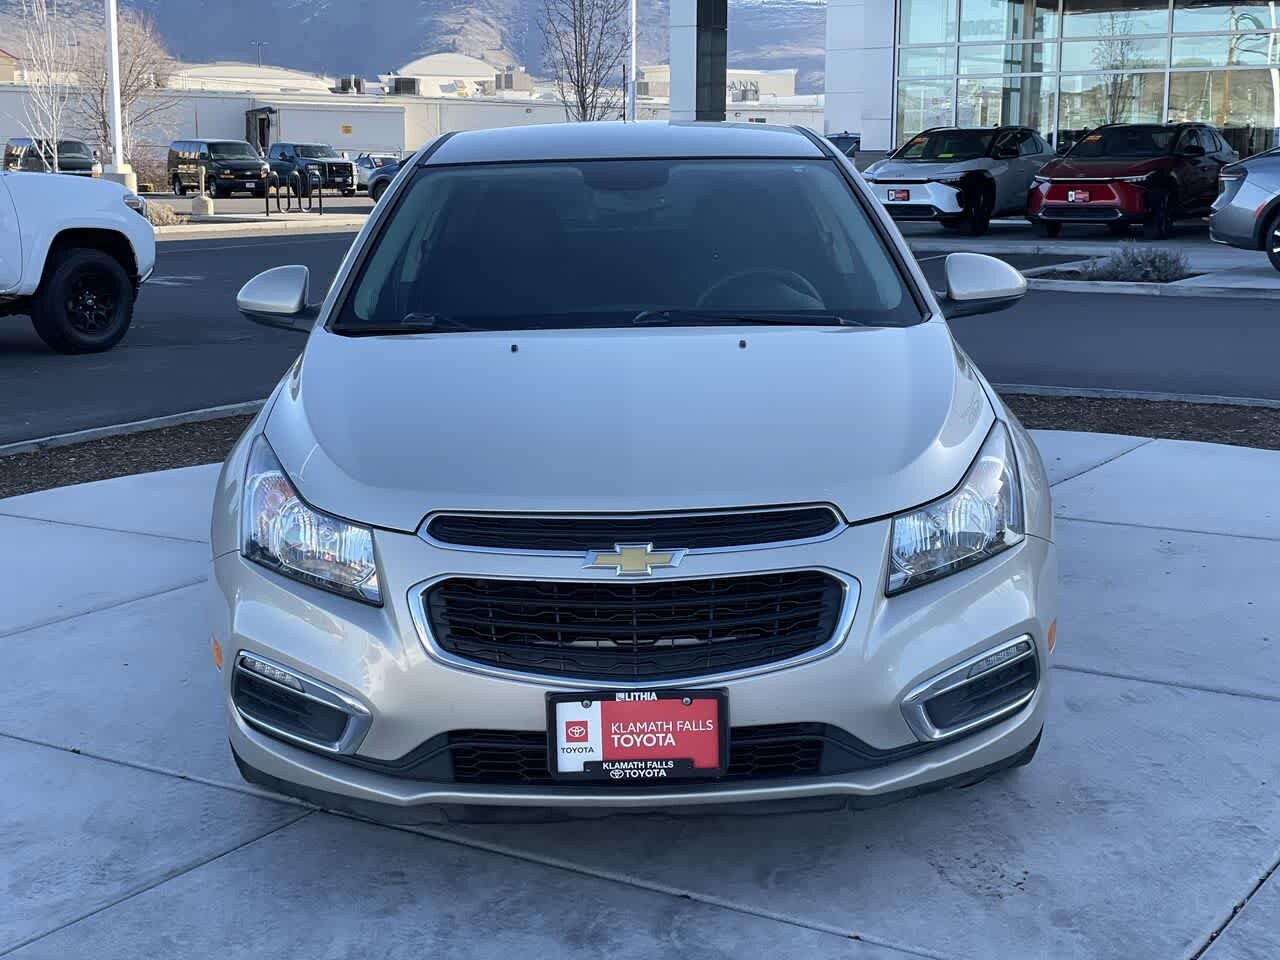 2016 Chevrolet Cruze Limited 3